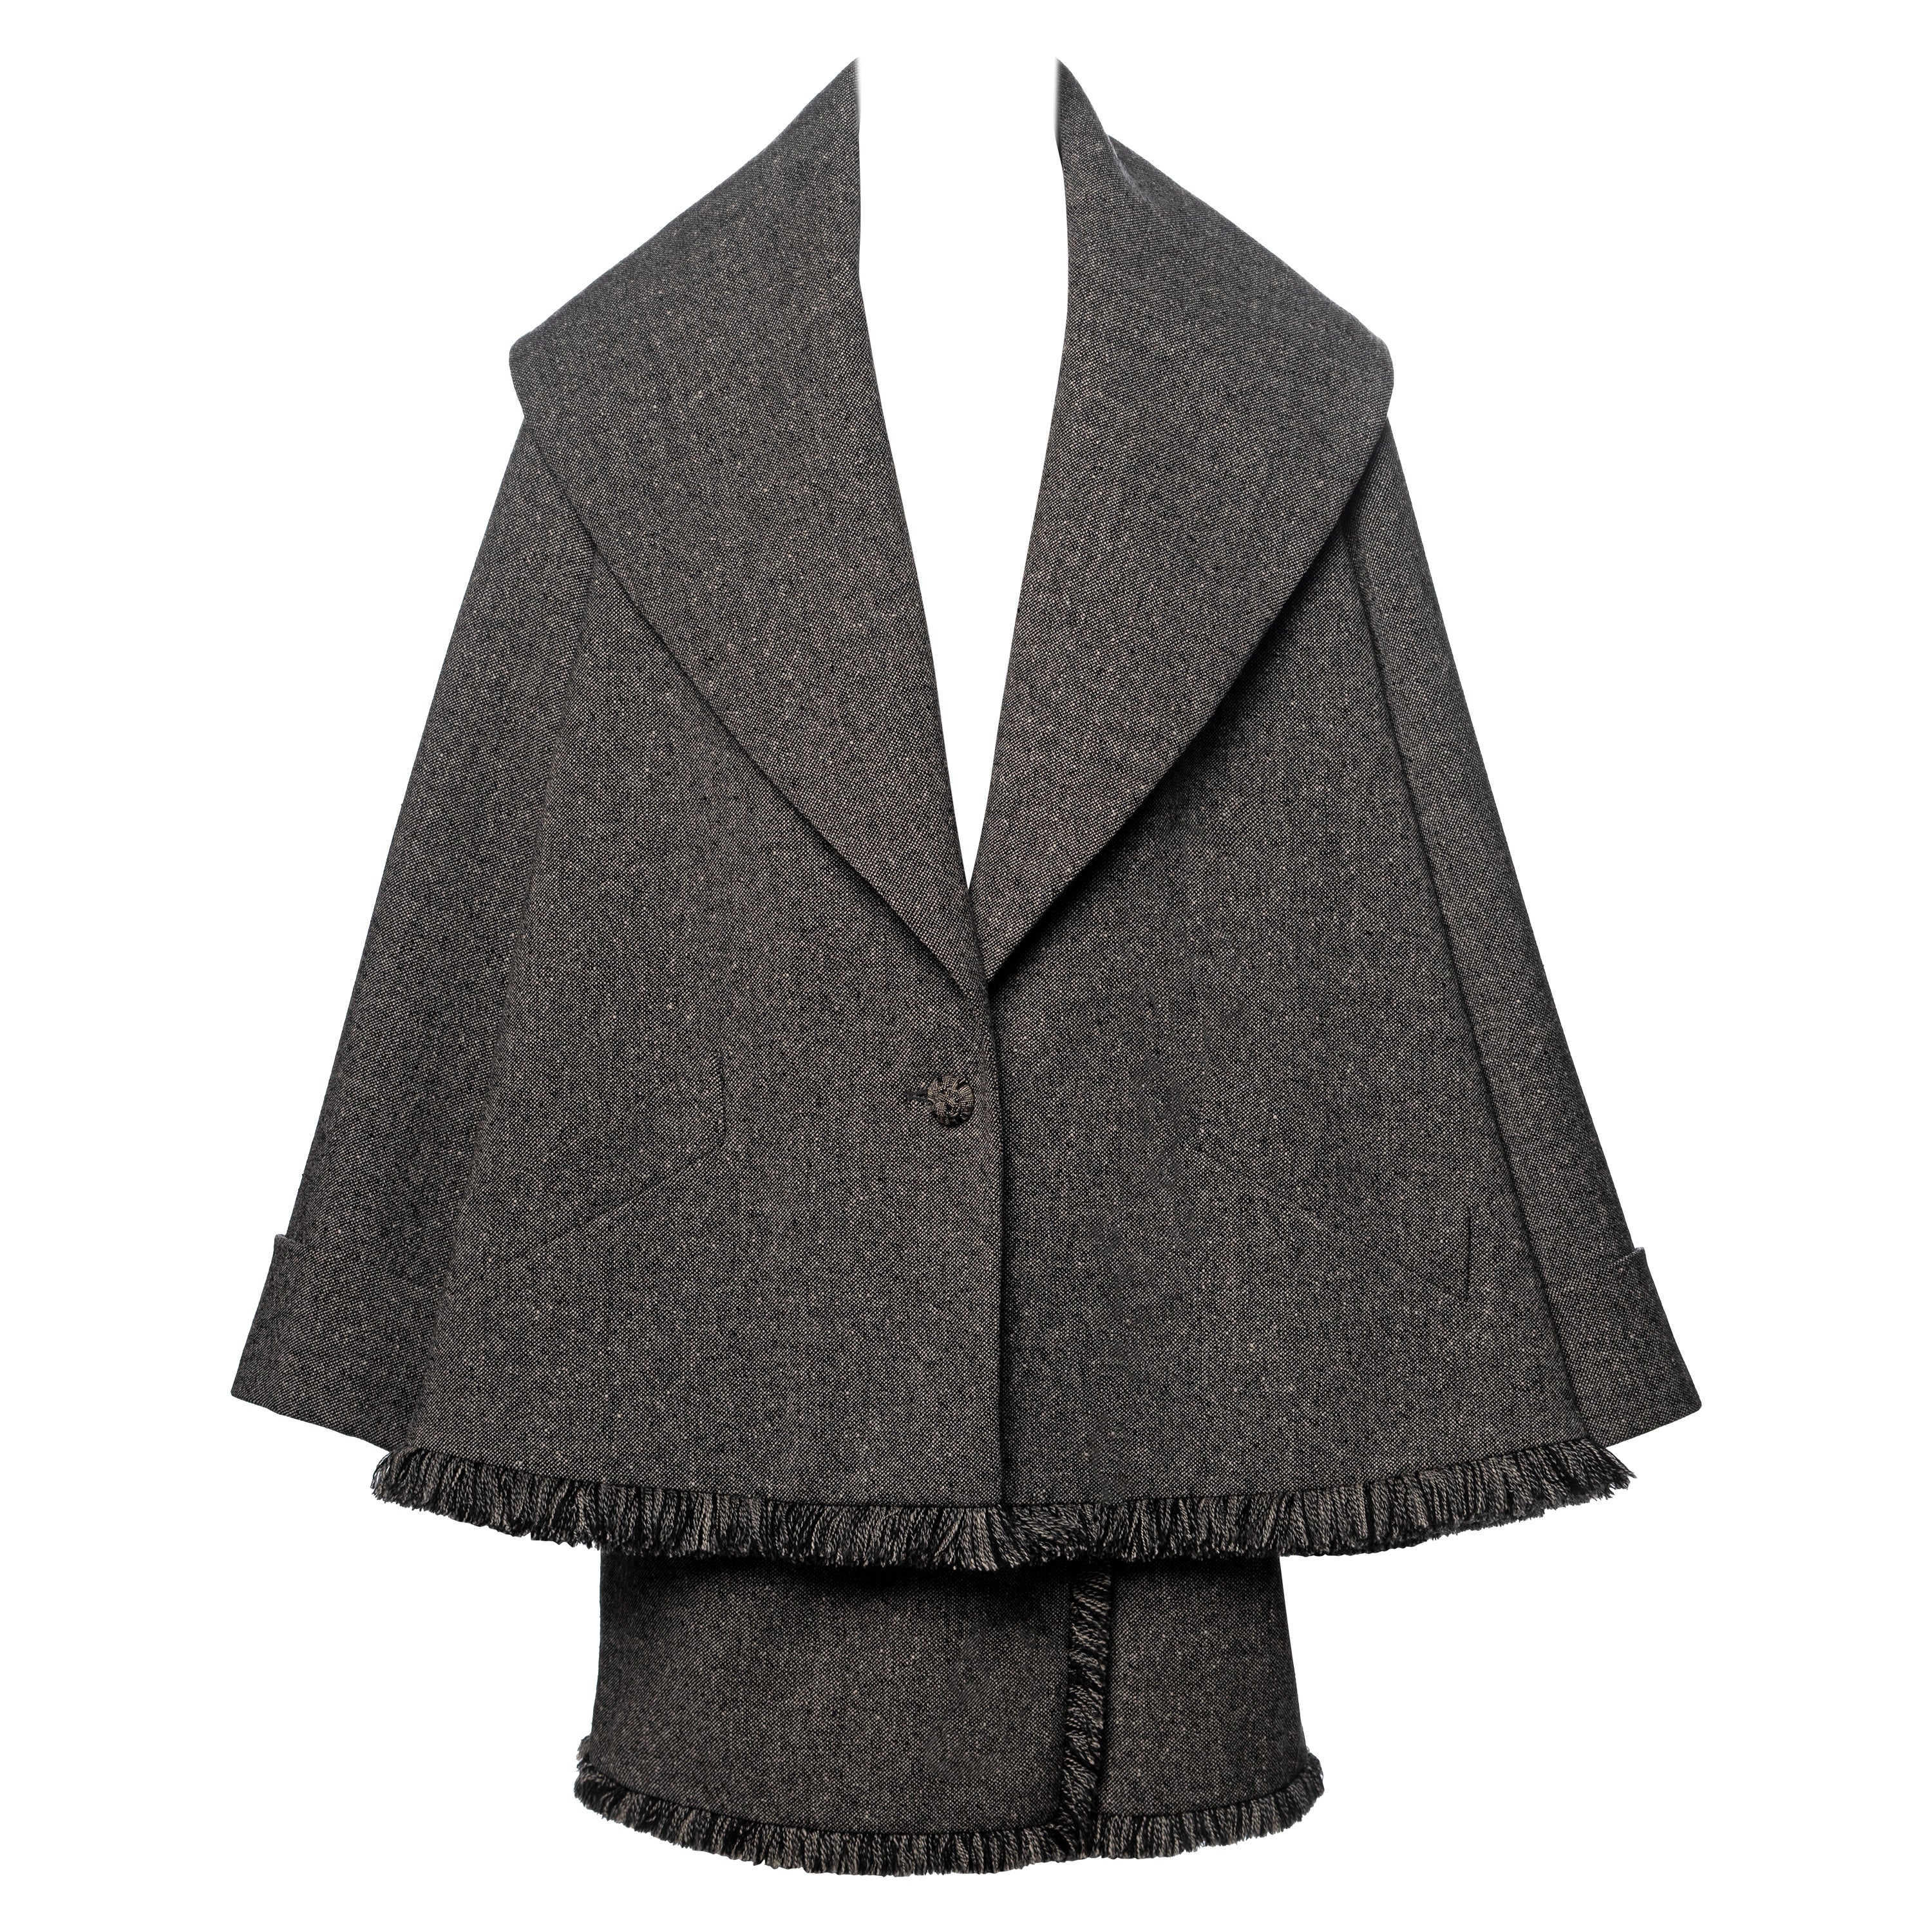 Christian Dior by John Galliano Grey Tweed Jacket and Mini Skirt Suit, FW 1998 For Sale